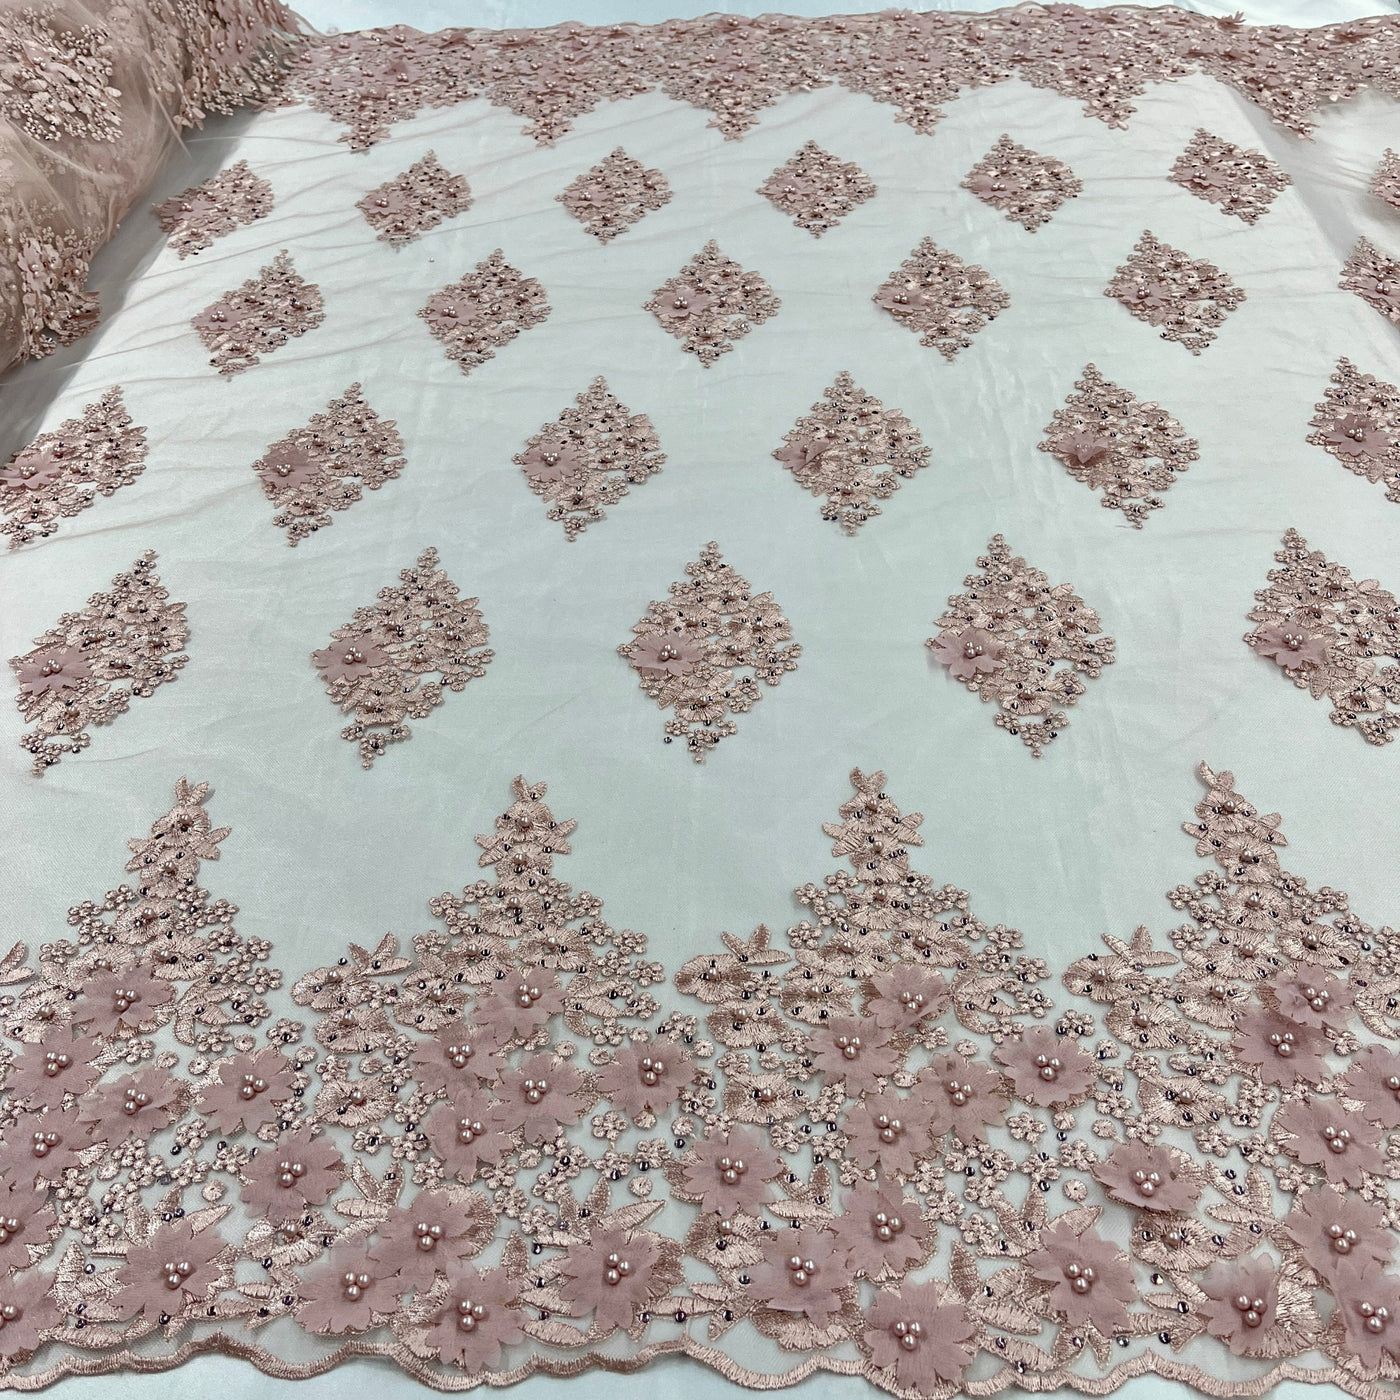 Beaded 3D Floral Lace Fabric Embroidered on 100% Polyester Net Mesh | Lace USA - GD-176